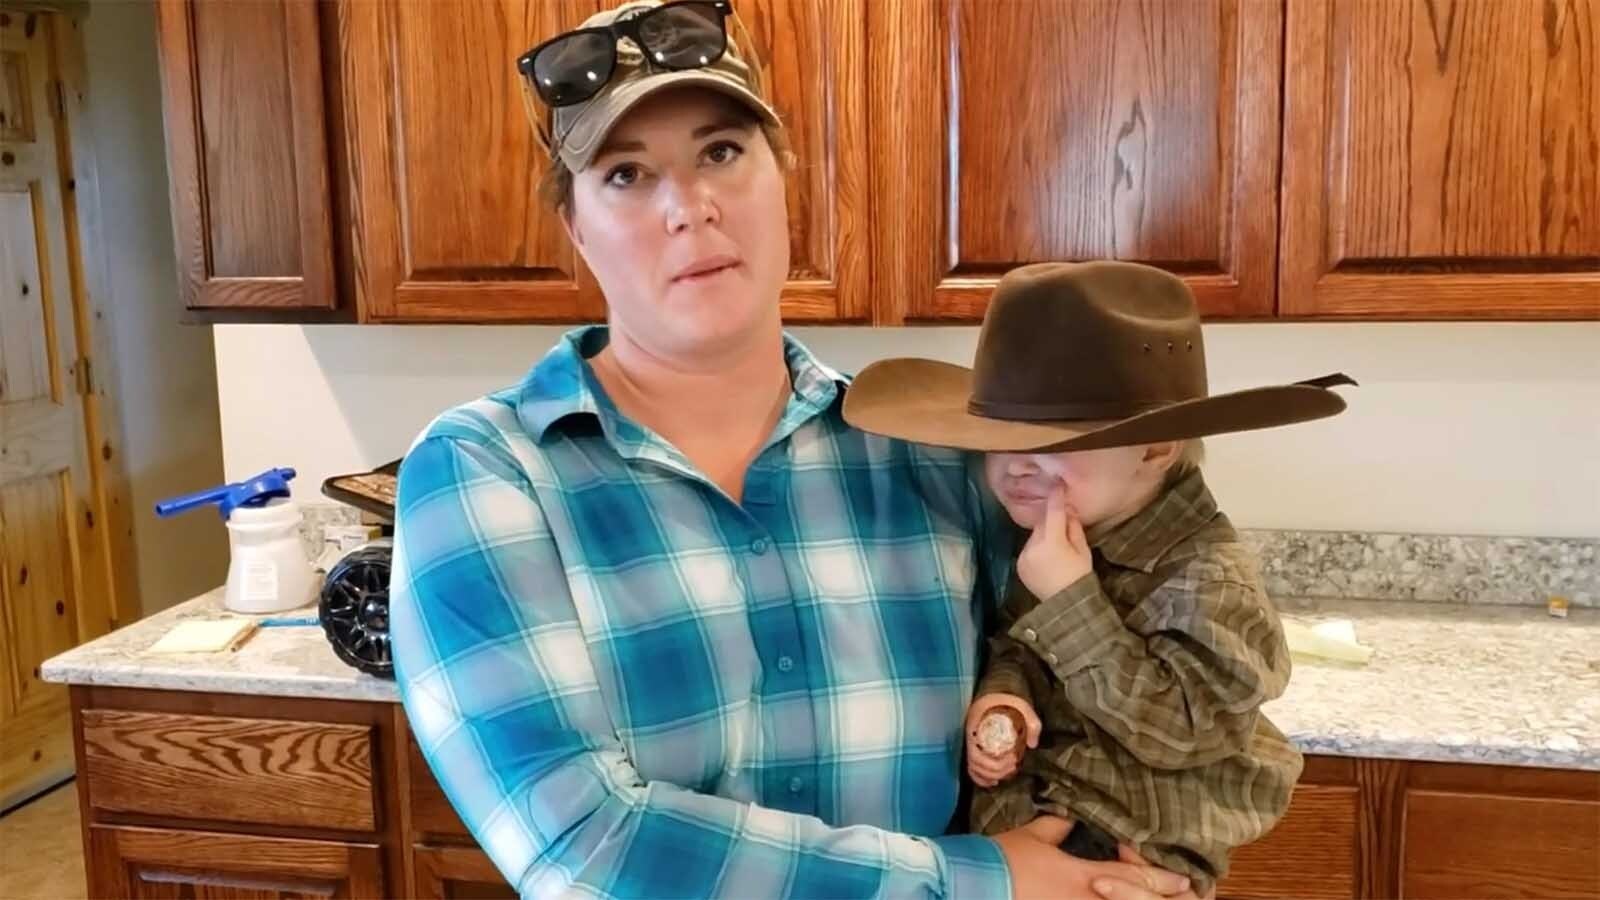 Wyoming rancher Leisl Carpenter who claims a federal COVID-era relief program shut her out because she’s white appealed her case to the U.S. Supreme Court this week.